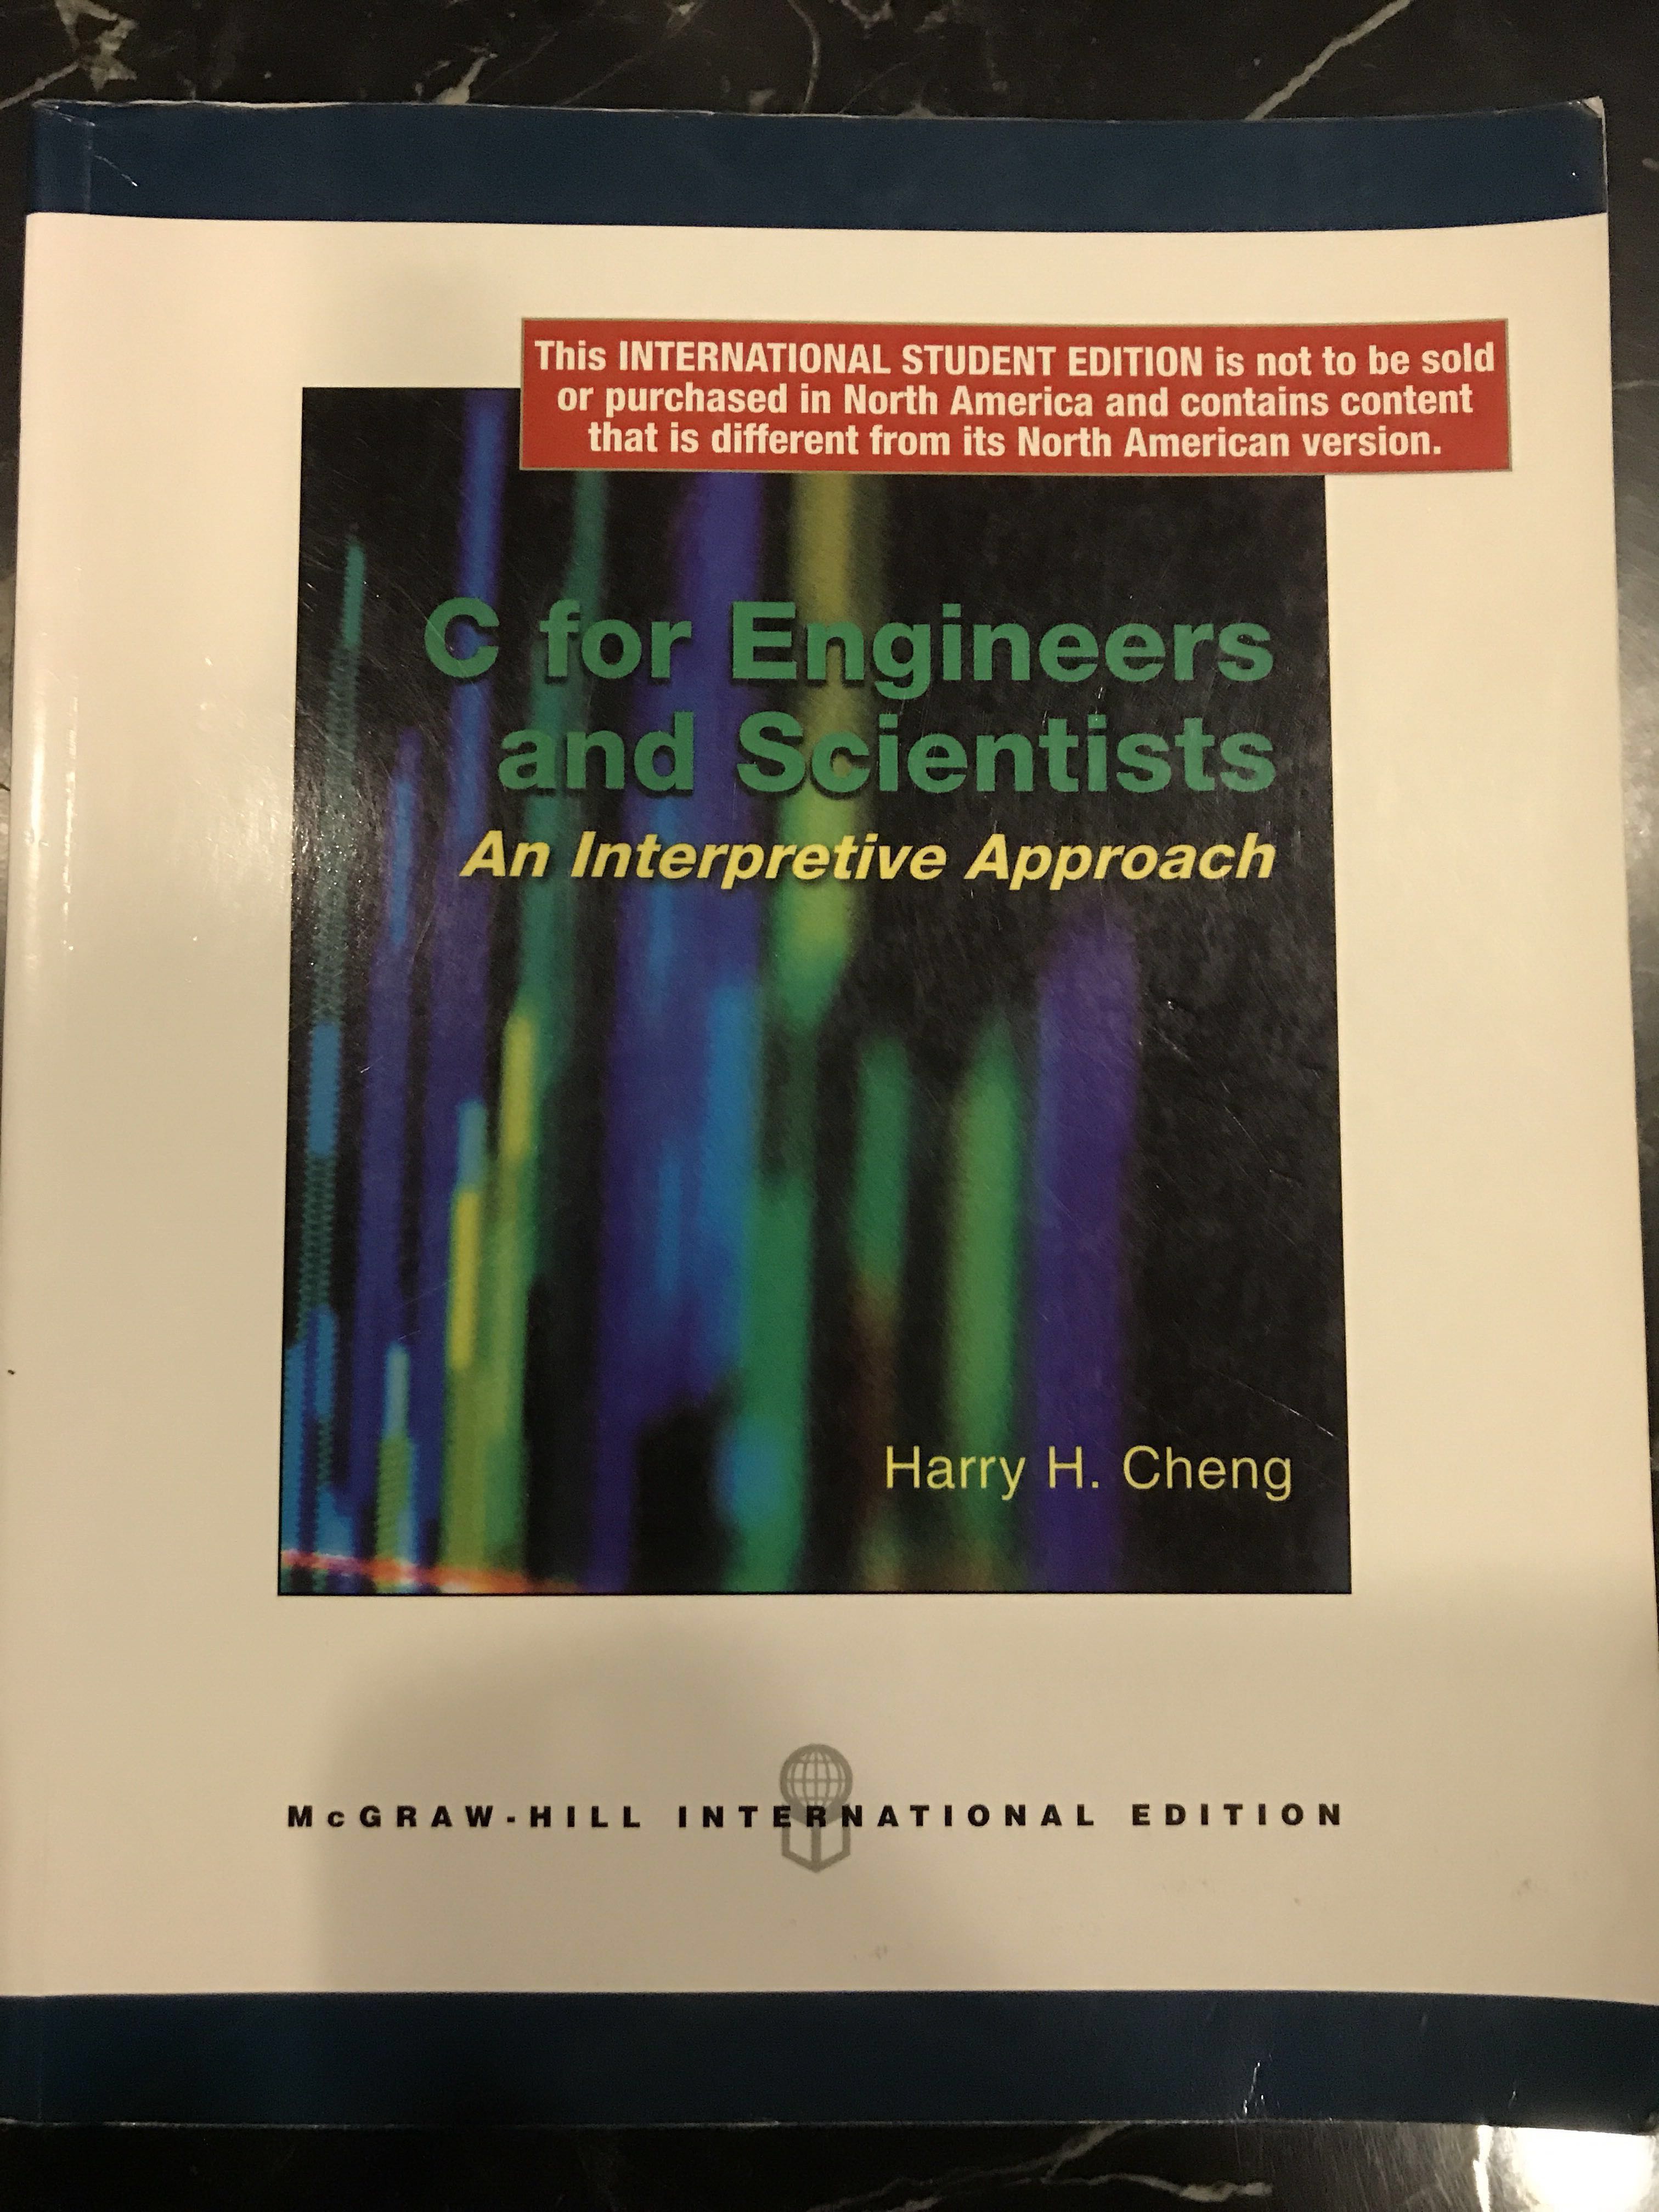 c for engineers and scientists an interpretive approach pdf